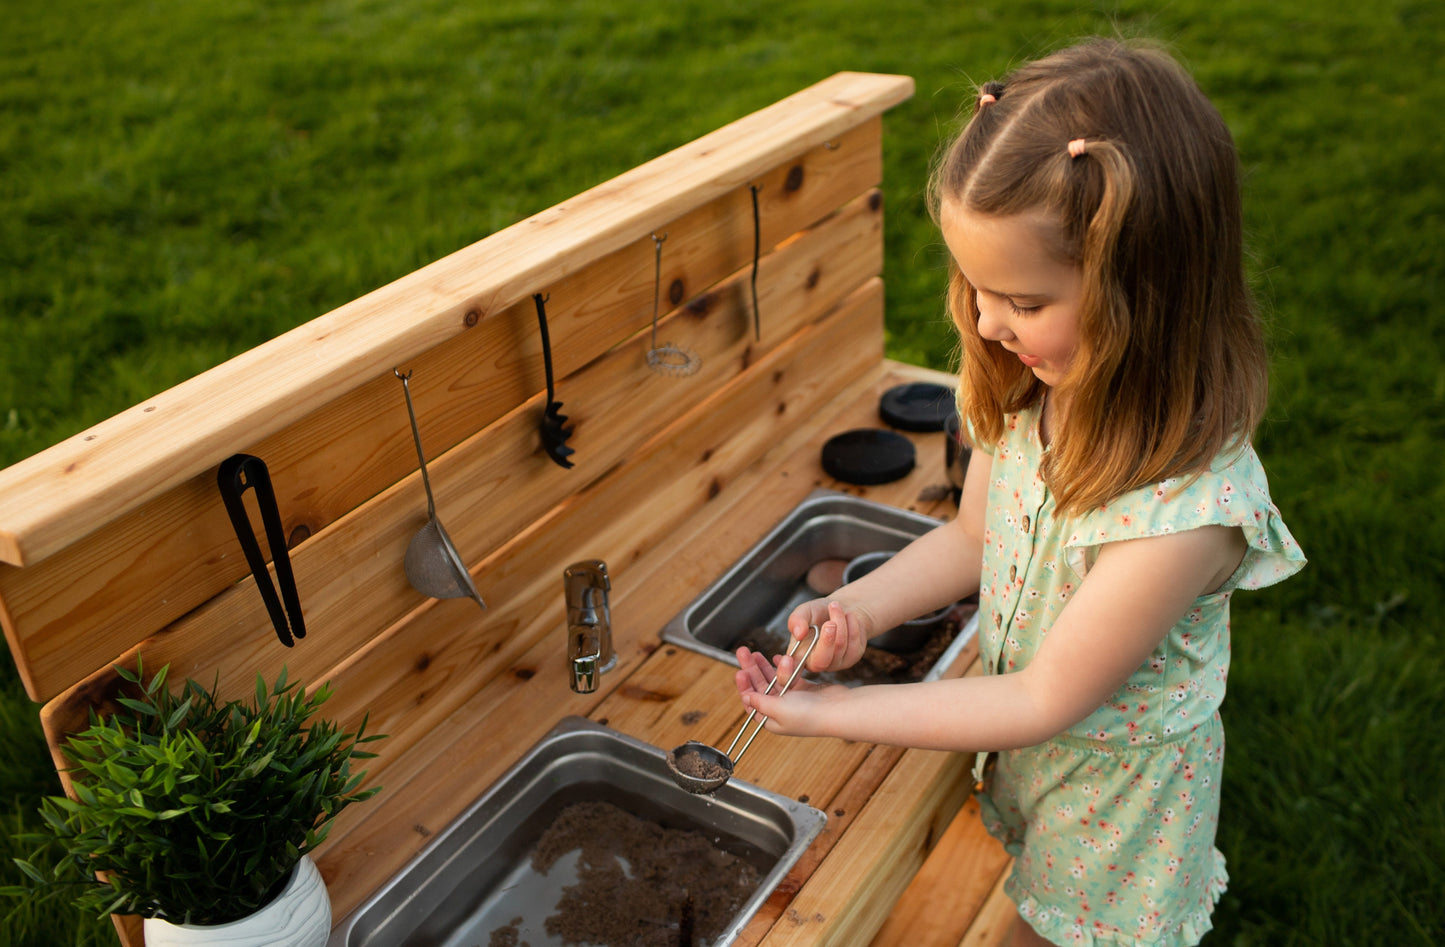 Mud Kitchen with Oven and Working Sink